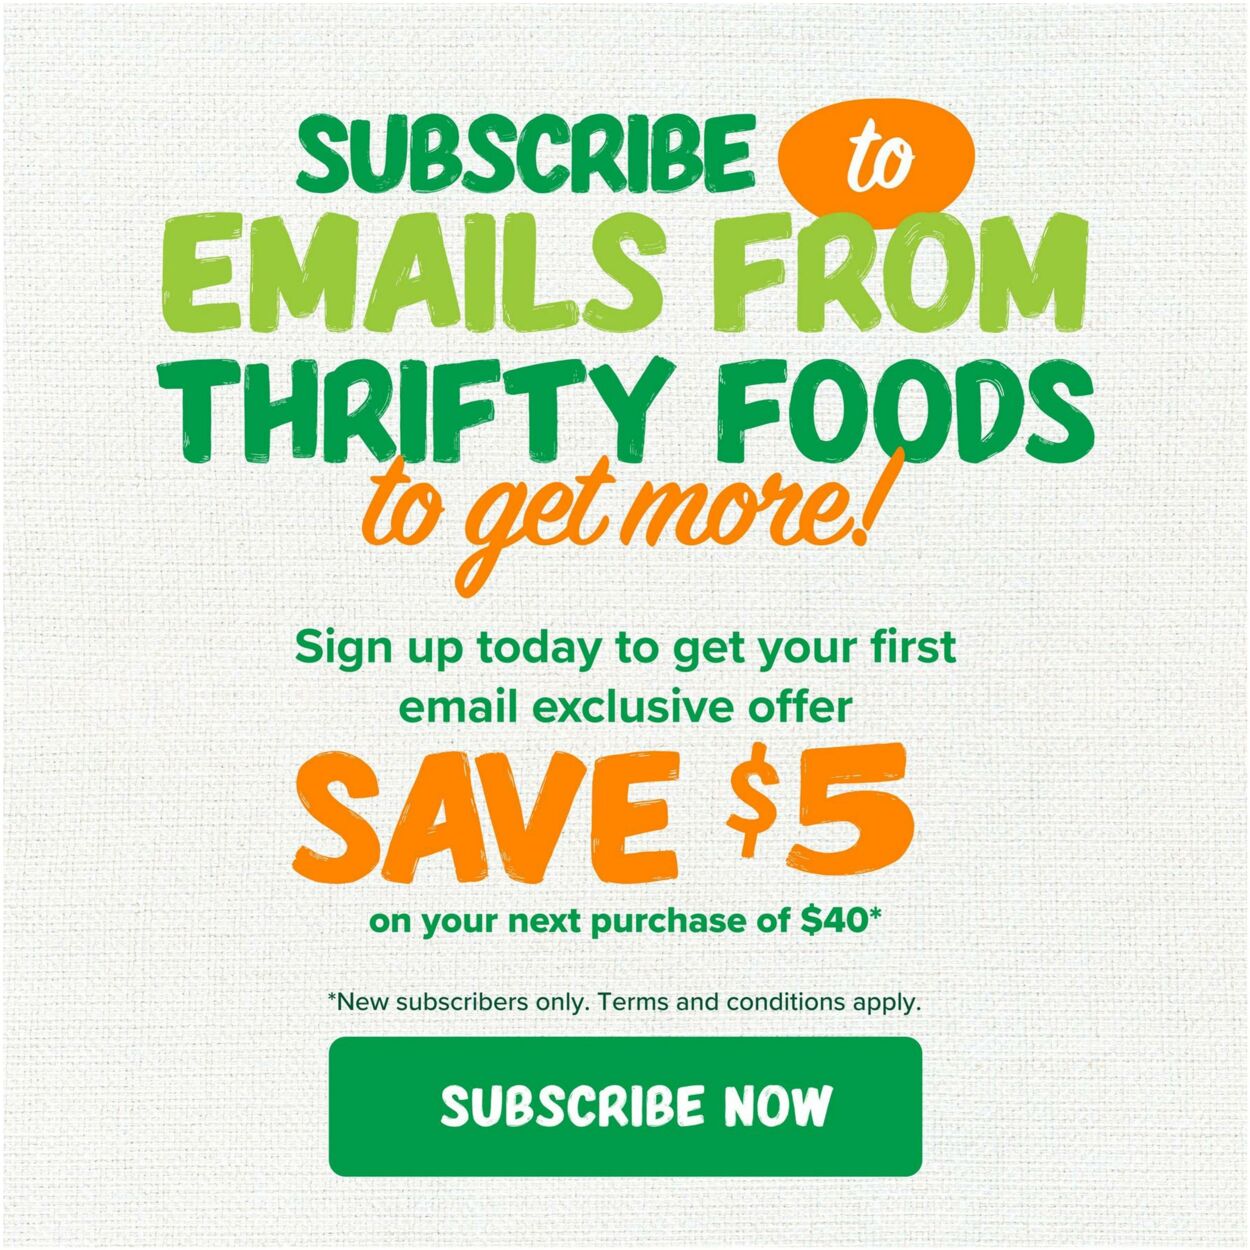 Circulaire Thrifty Foods 05.01.2023 - 11.01.2023